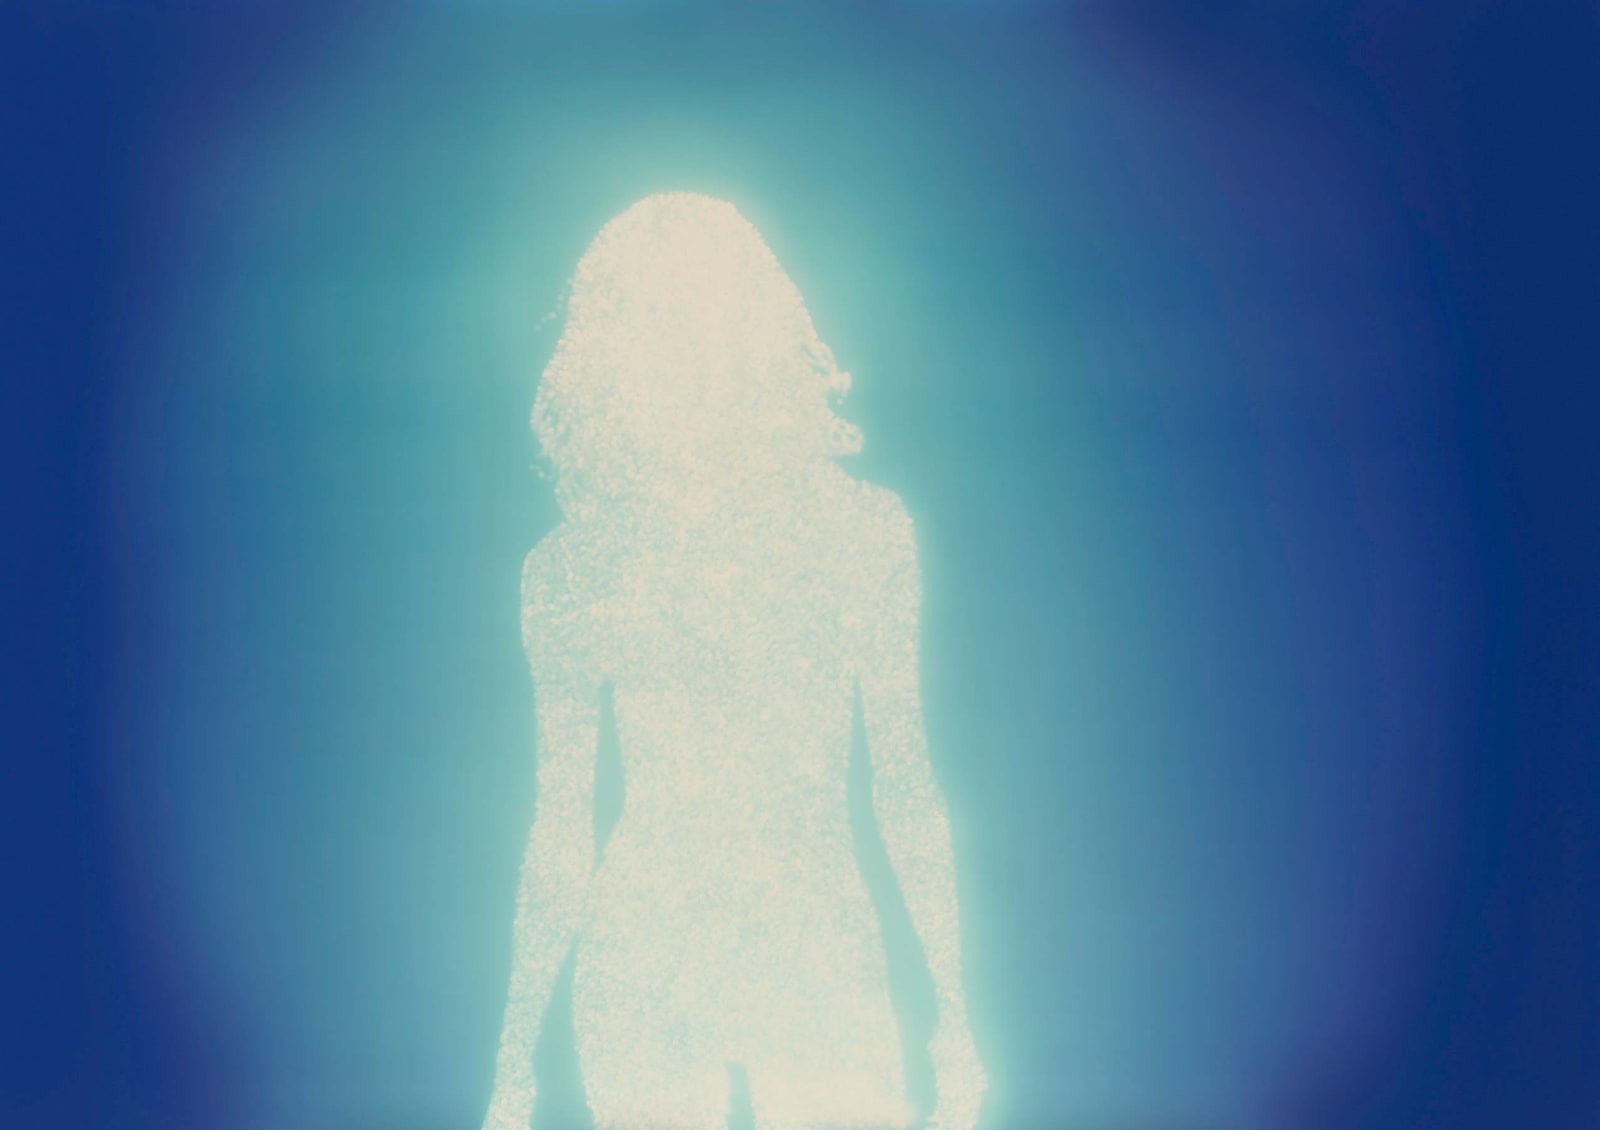 Christopher Bucklow Tetrarch, 11.46am, 16th April silhouette of nude woman in light coming through blue background